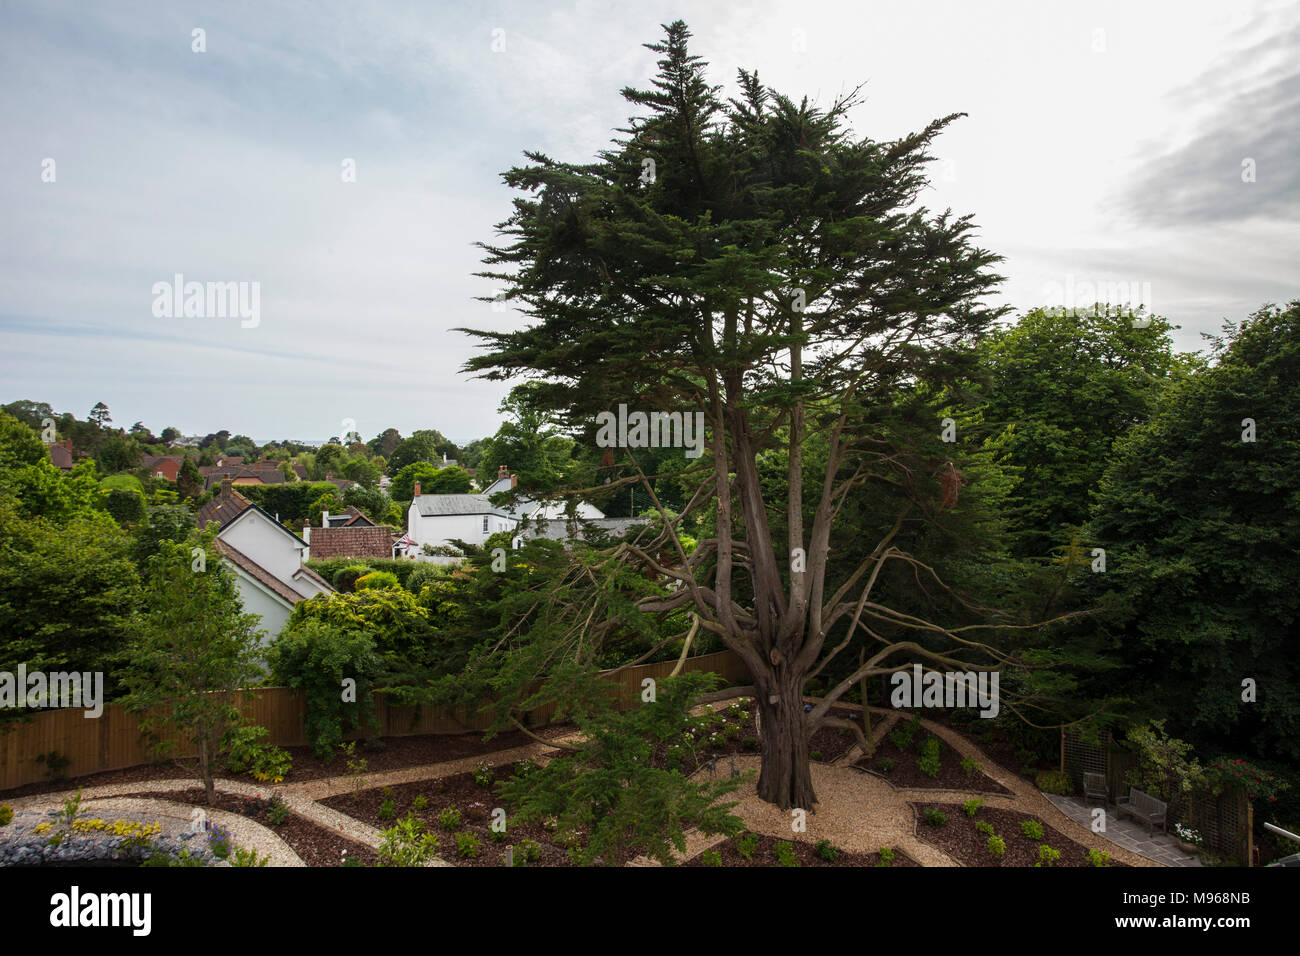 Monterey Cyprus  Cupressus macrocarpa tree surrounded by hydrangea beds in a newly laid out garden in Devon Stock Photo